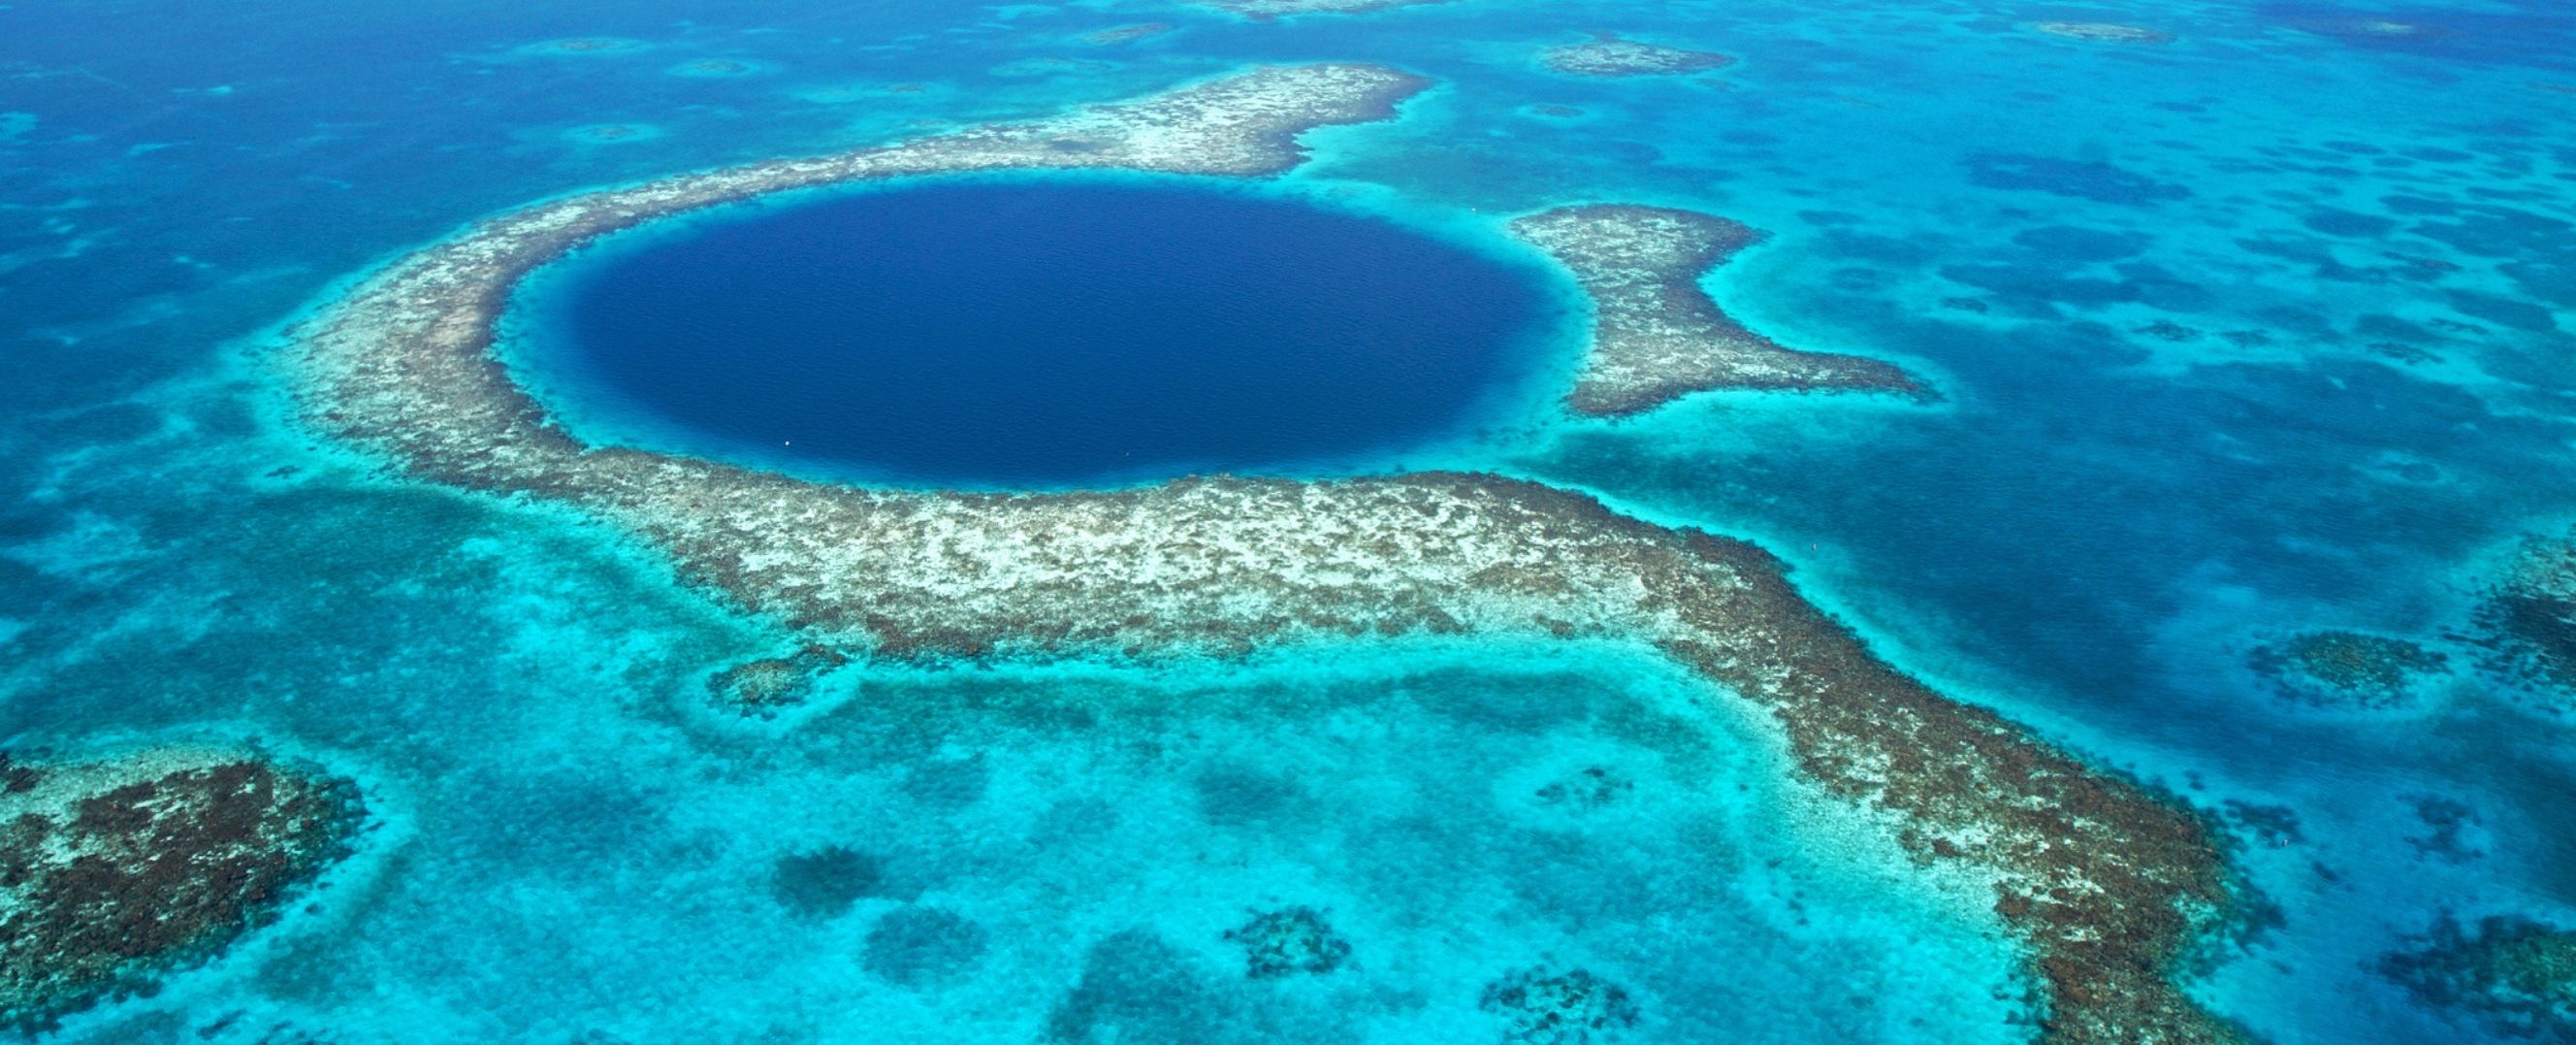 The Great Blue Hole in Belize is a giant underwater sinkhole.